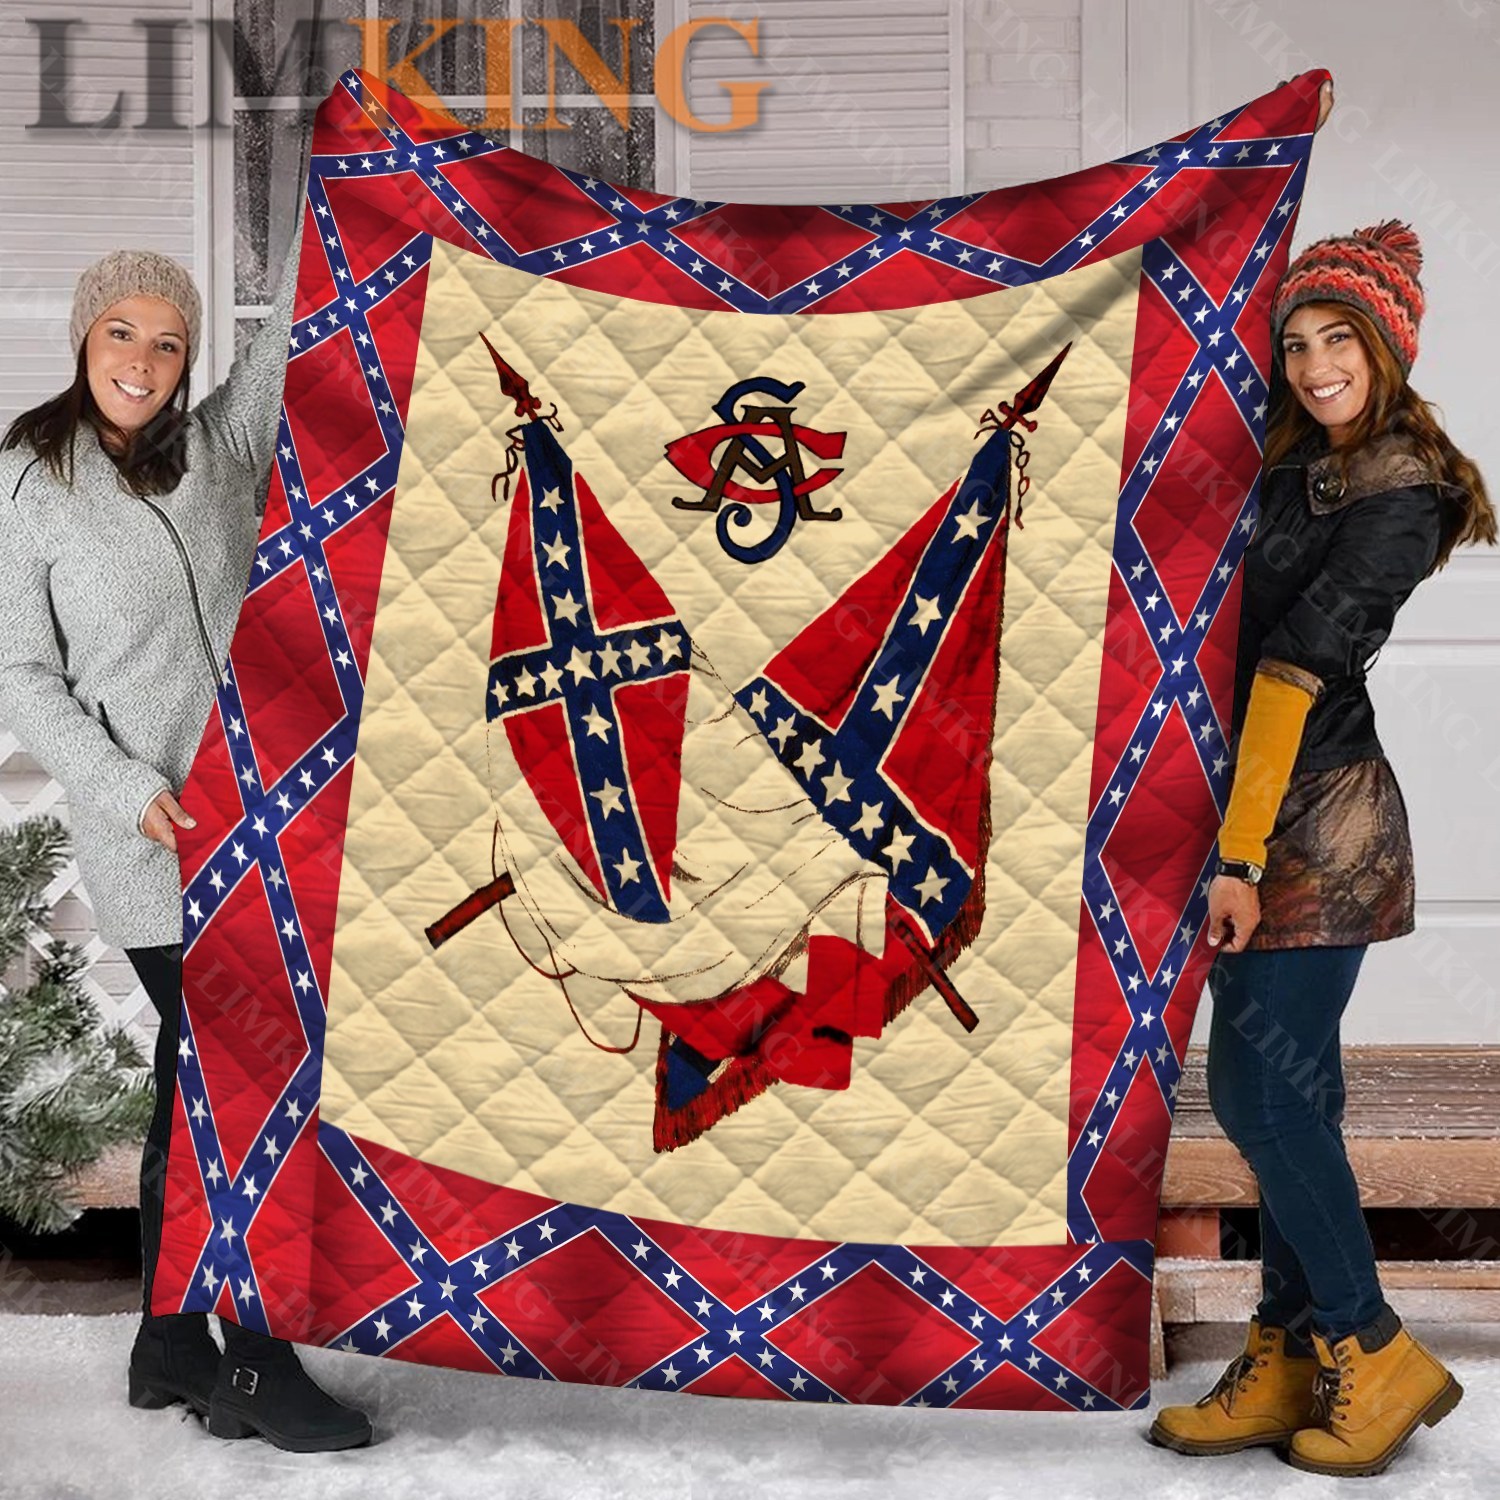 The Southern United States Confederate Flag Quilt – hothot 100320